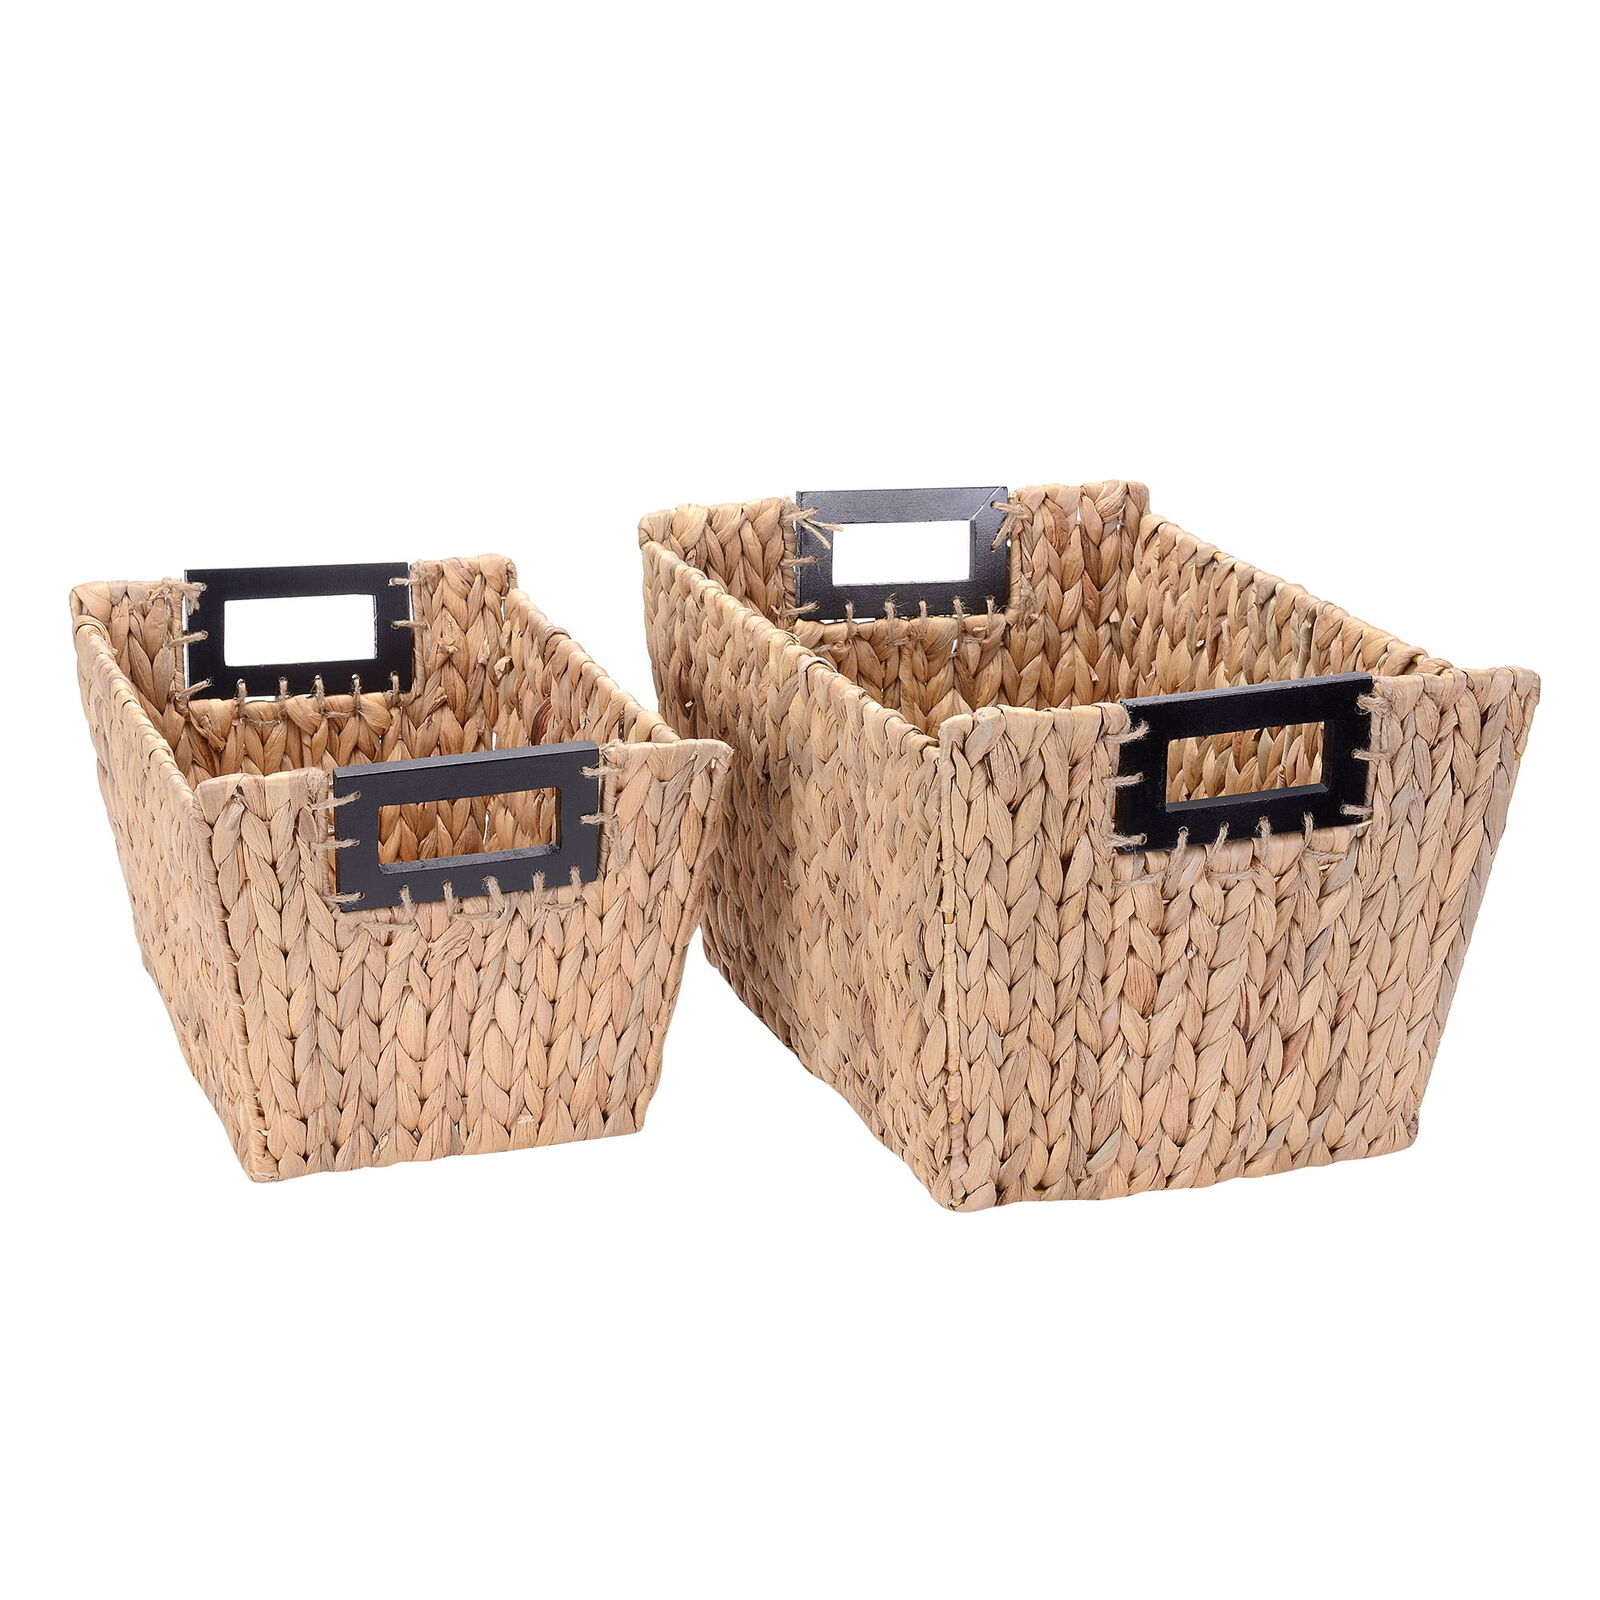 Rectangle Handmade Wicker Baskets made of Water Hyacinth, Set of 2, Natural